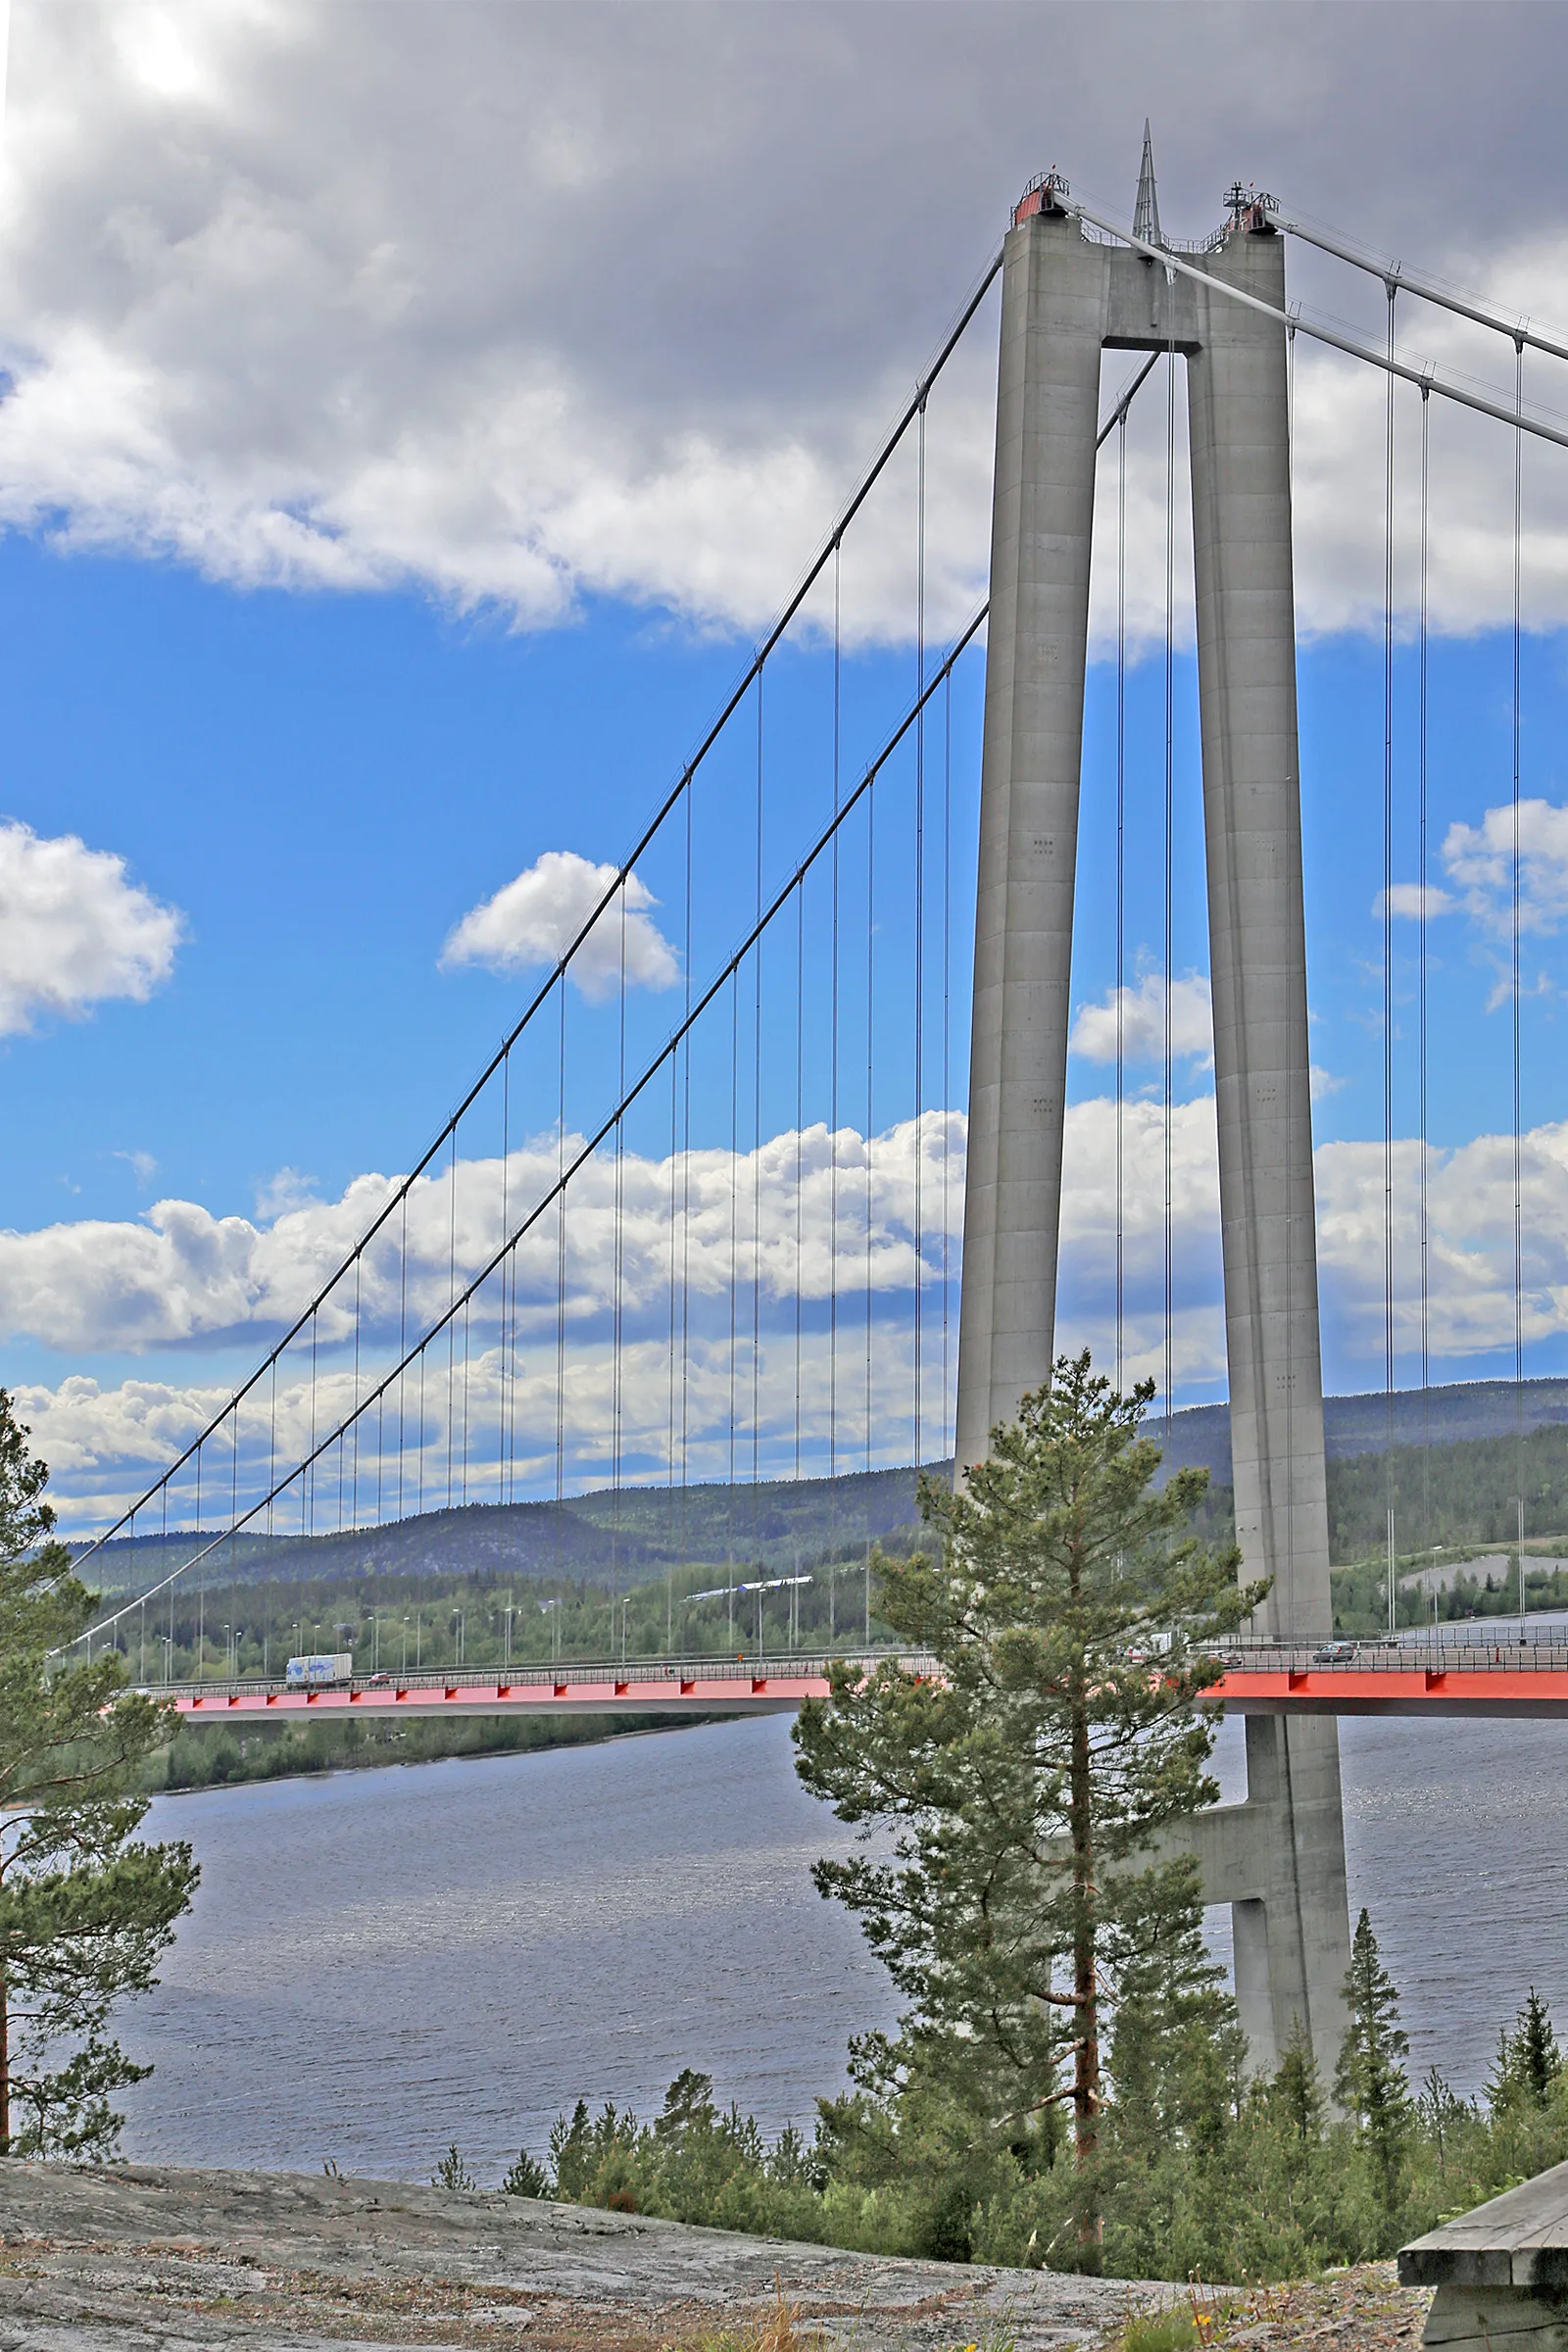 Photo showing: Kramfors Sweden - Bridge: The Högakustenbron is a suspension bridge over the river Ångermanälven in the municipality Kramfors. The road bridge has a length of 1,867 meters and a total height of 186 meters.